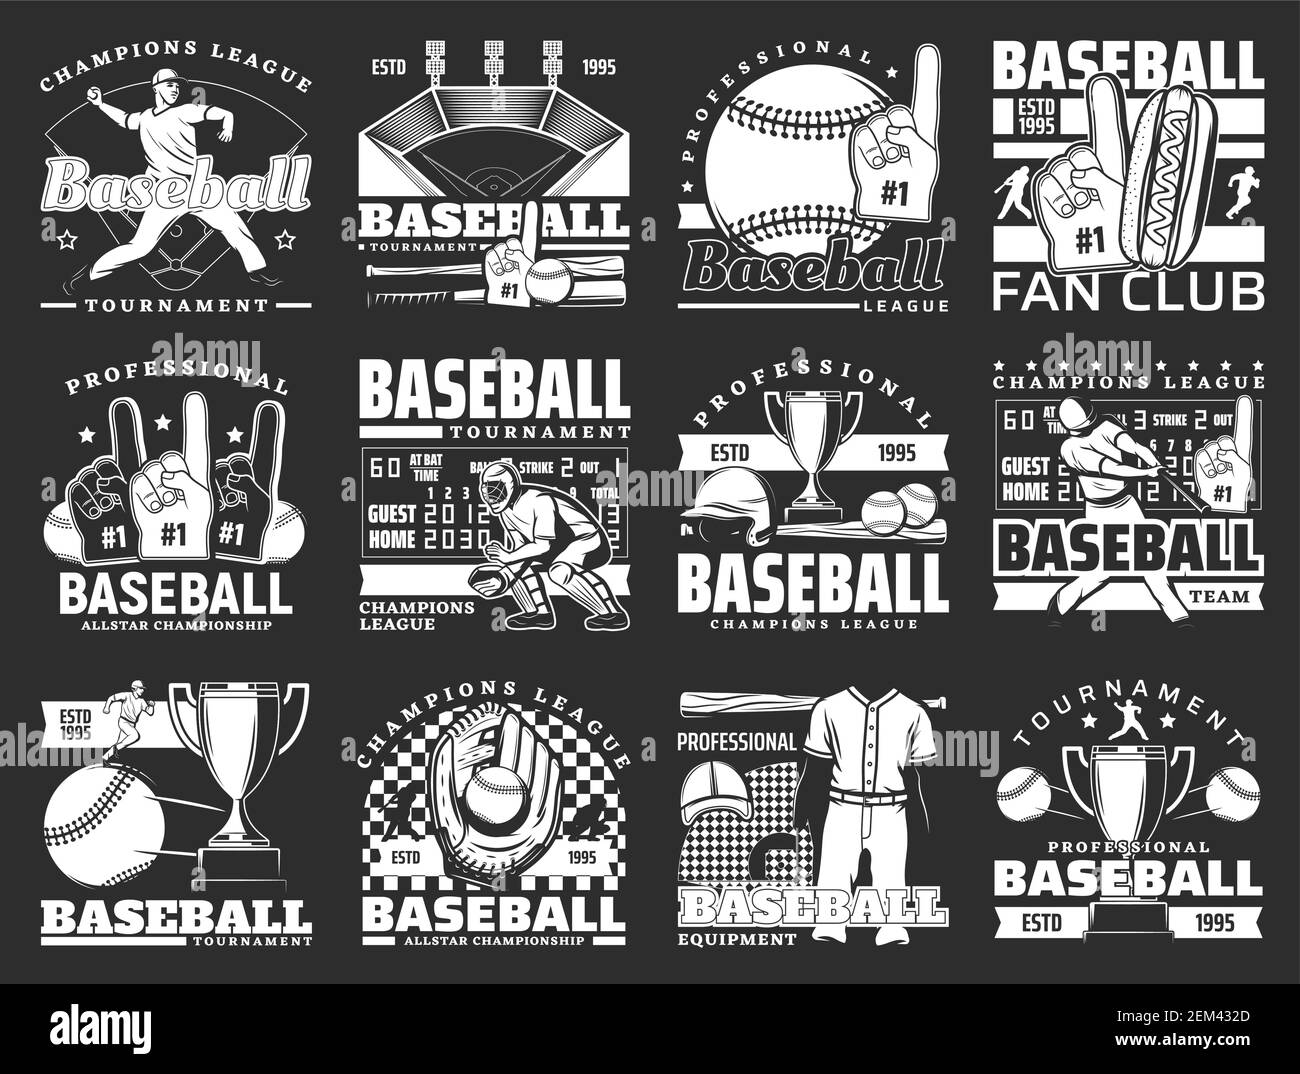 Baseball sport game championship vector icons with balls, bats and winner trophy cup, players, stadium play field, catcher gloves and helmets, scorebo Stock Vector